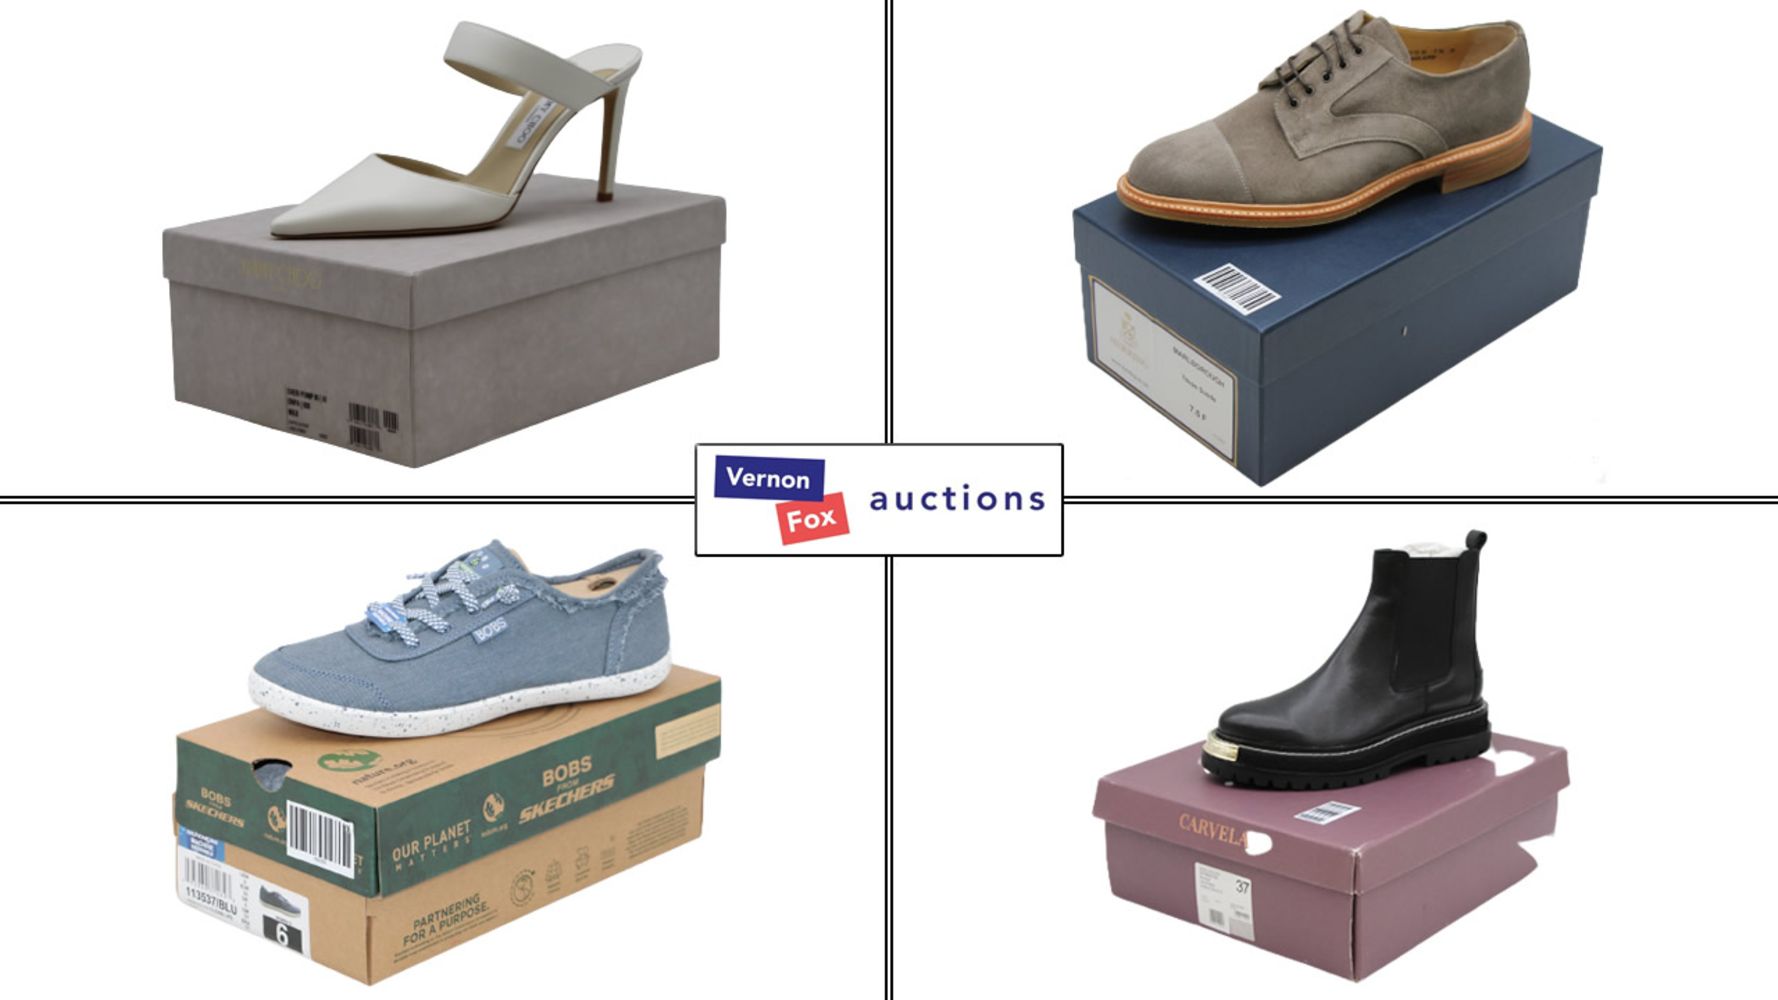 TIMED ONLINE AUCTION: Shoes, Boots, Trainers and other Footwear at Discounted Prices, with FREE UK DELIVERY!